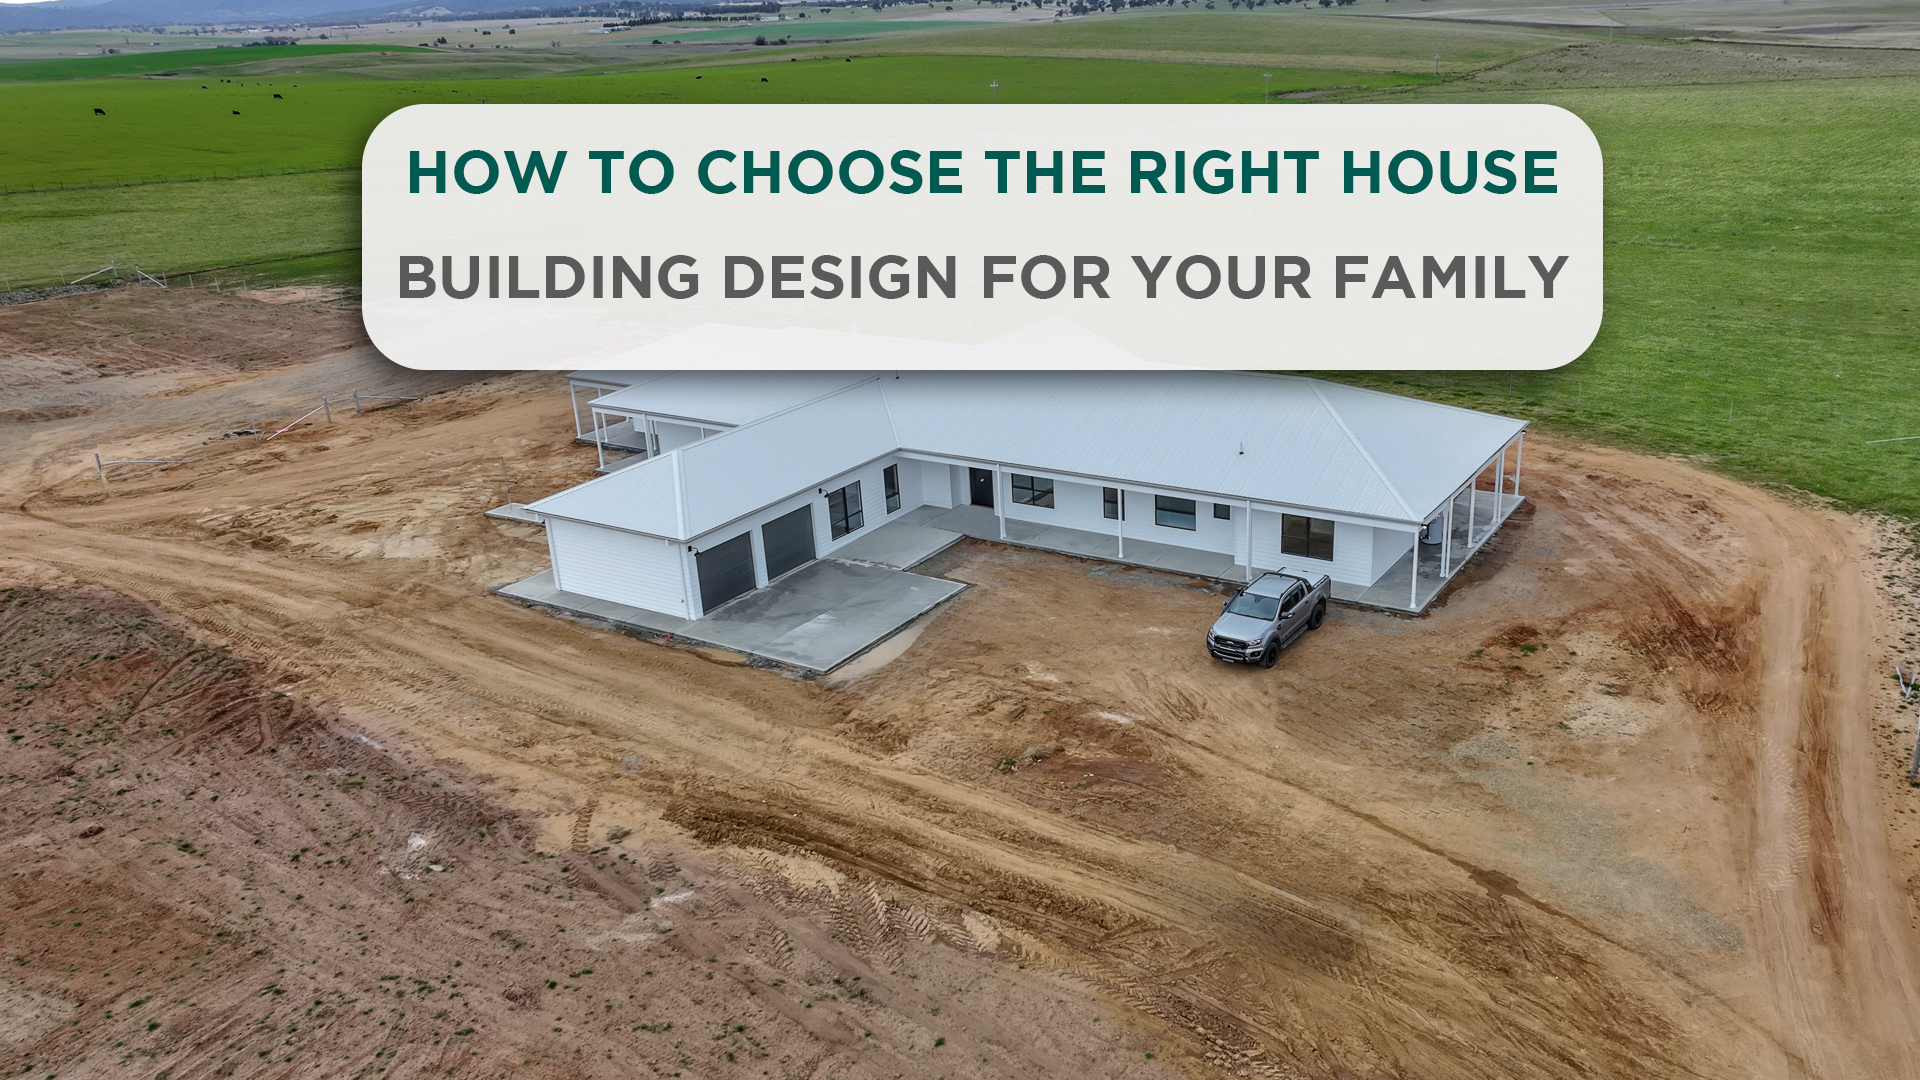 How to choose the right house building design for your family